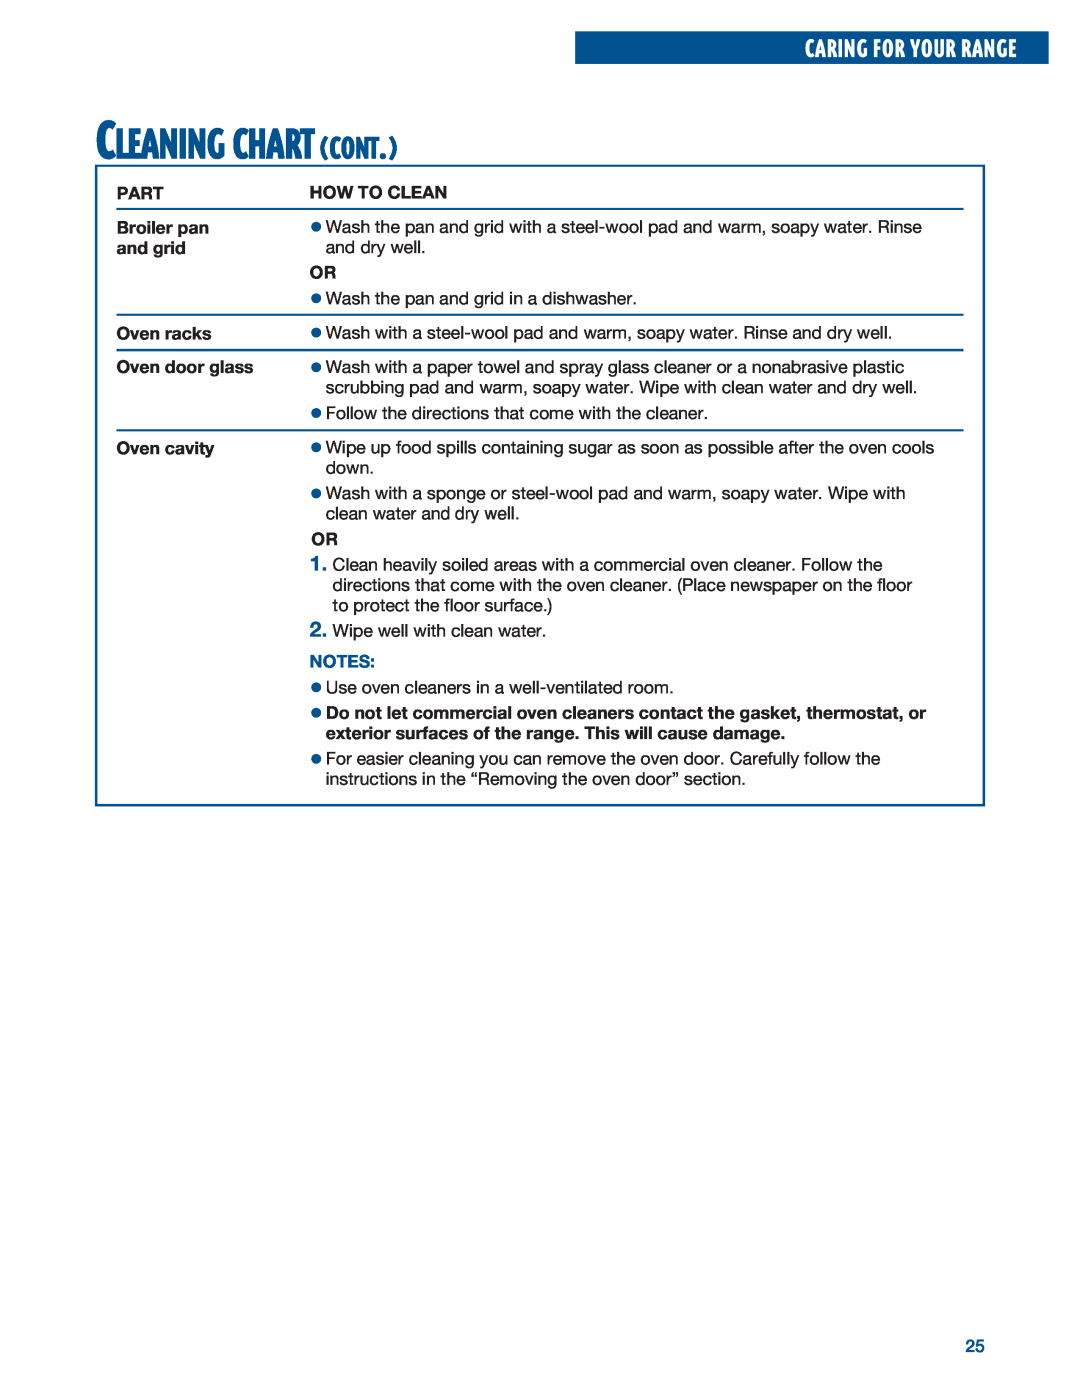 Whirlpool RF315PXE warranty Cleaning Chart Cont, Caring For Your Range 